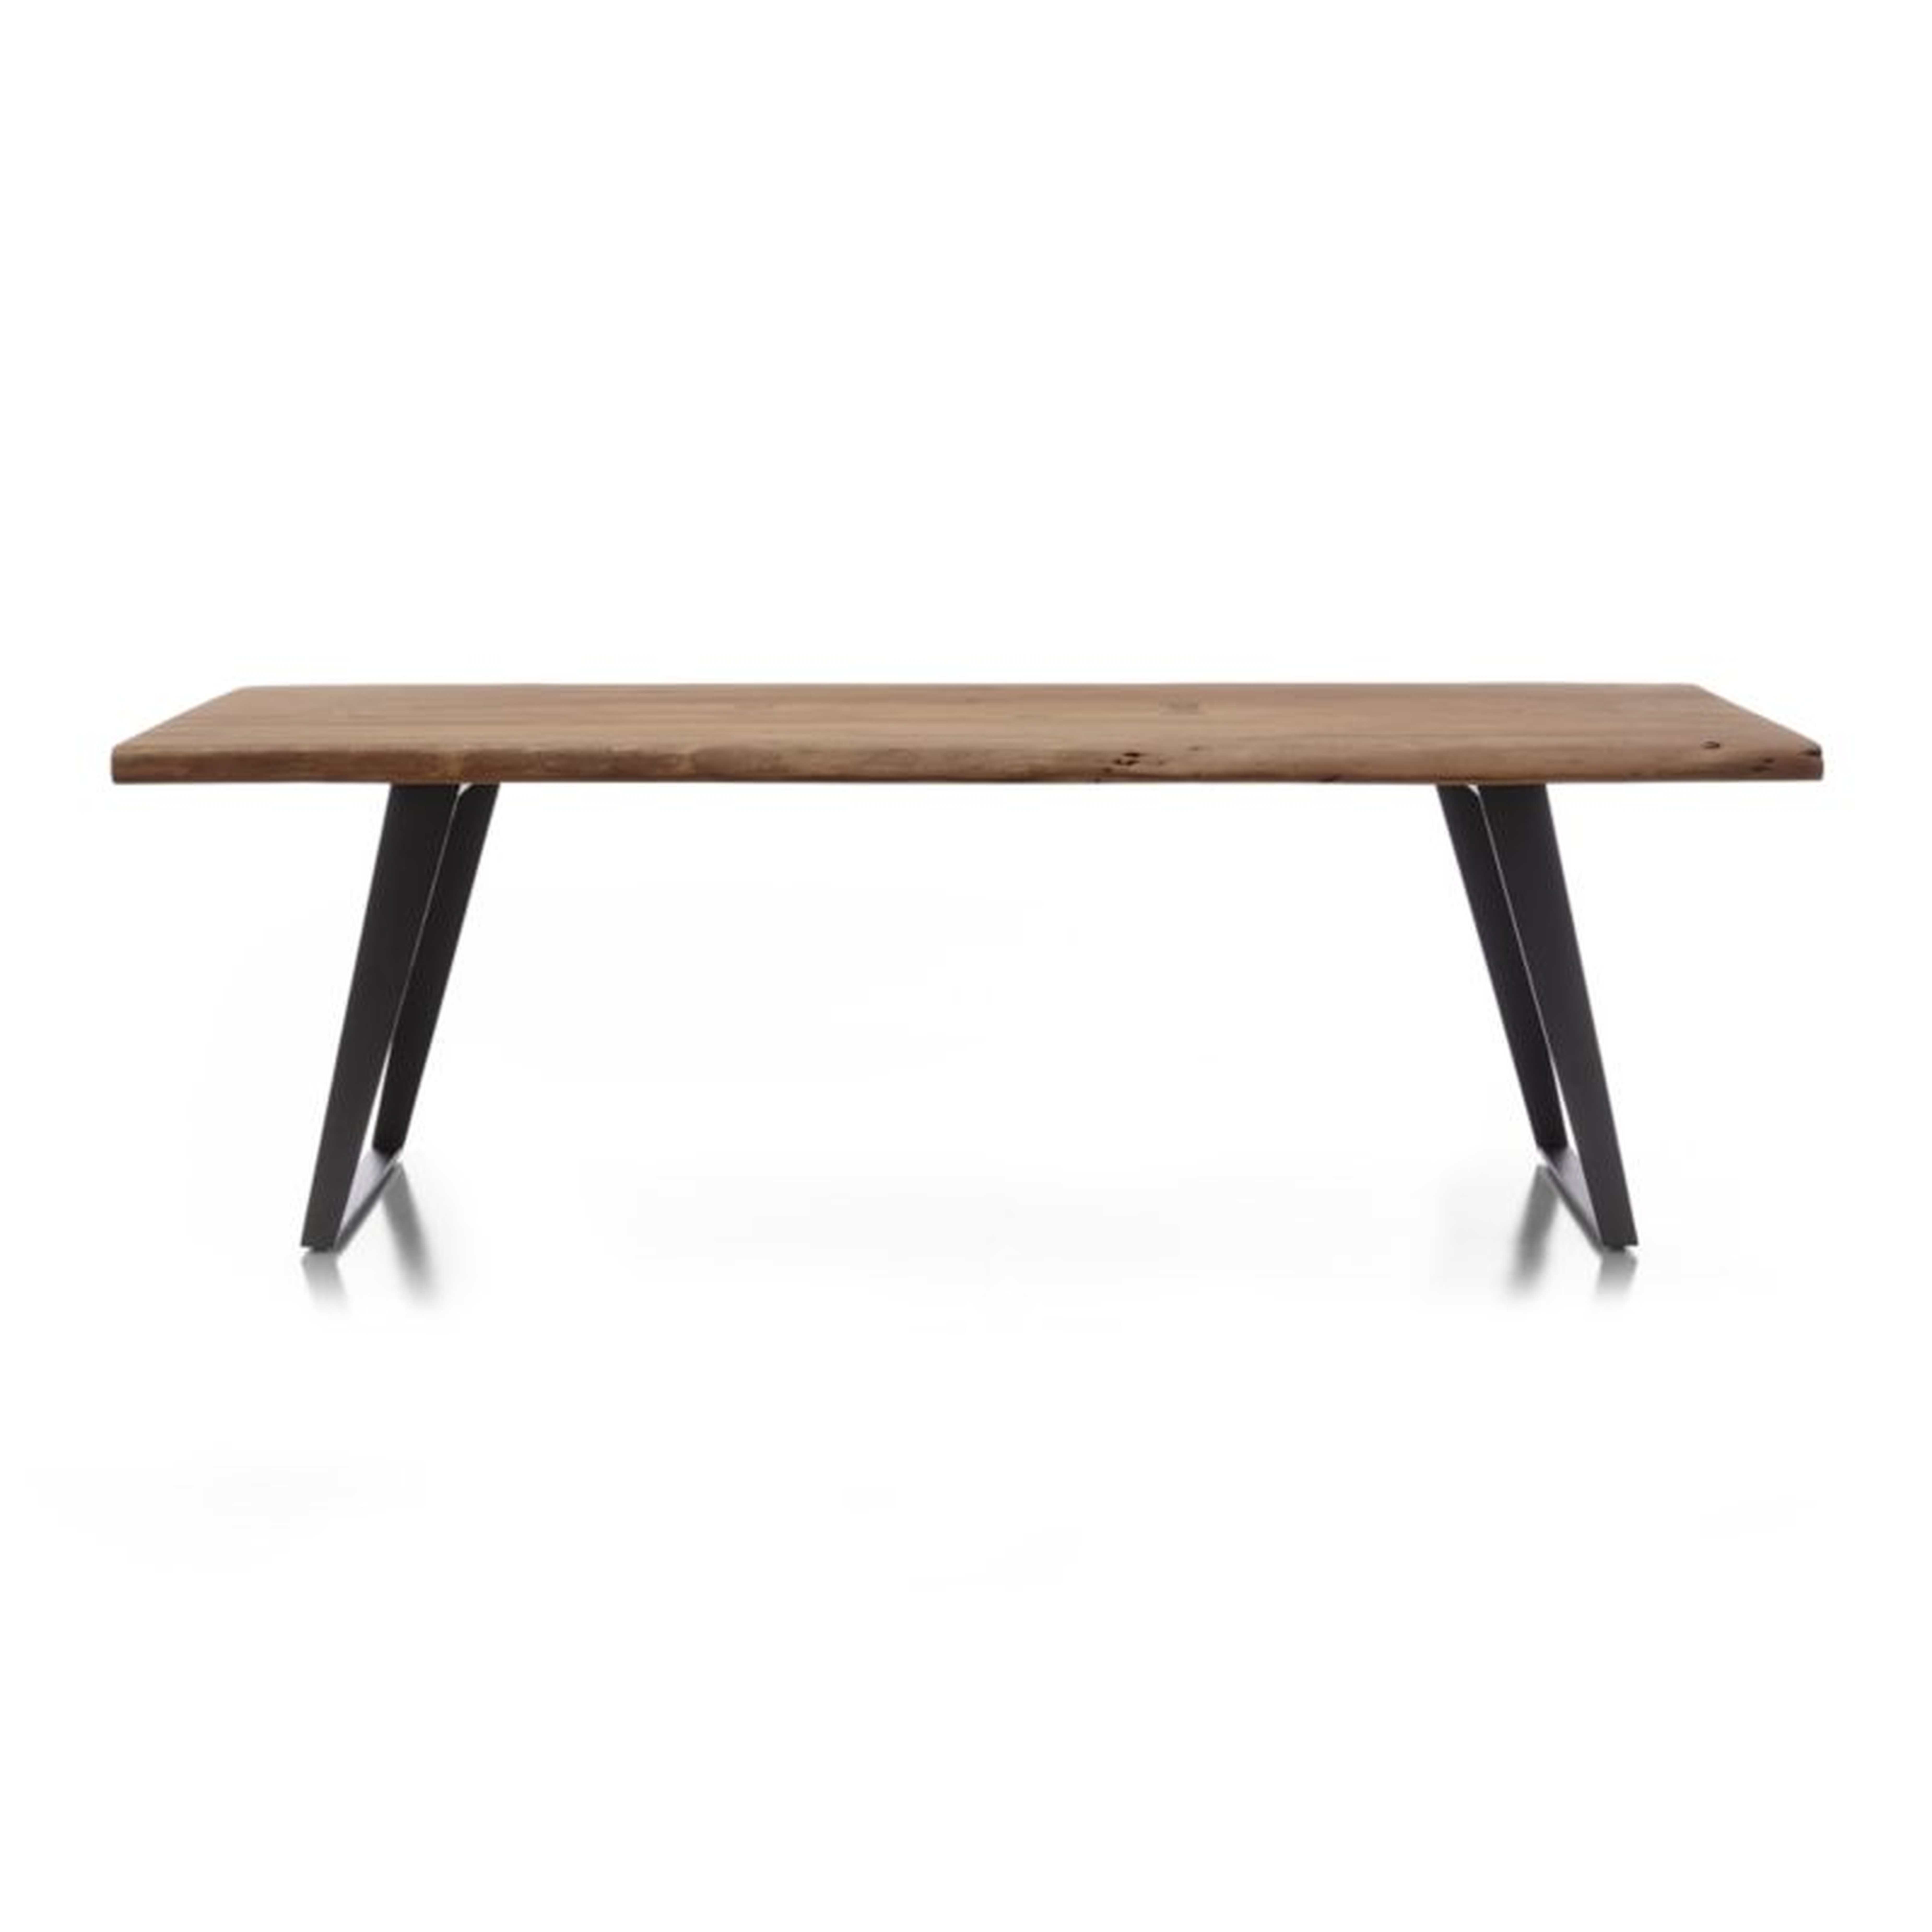 Yukon 80" Dining Table - Crate and Barrel